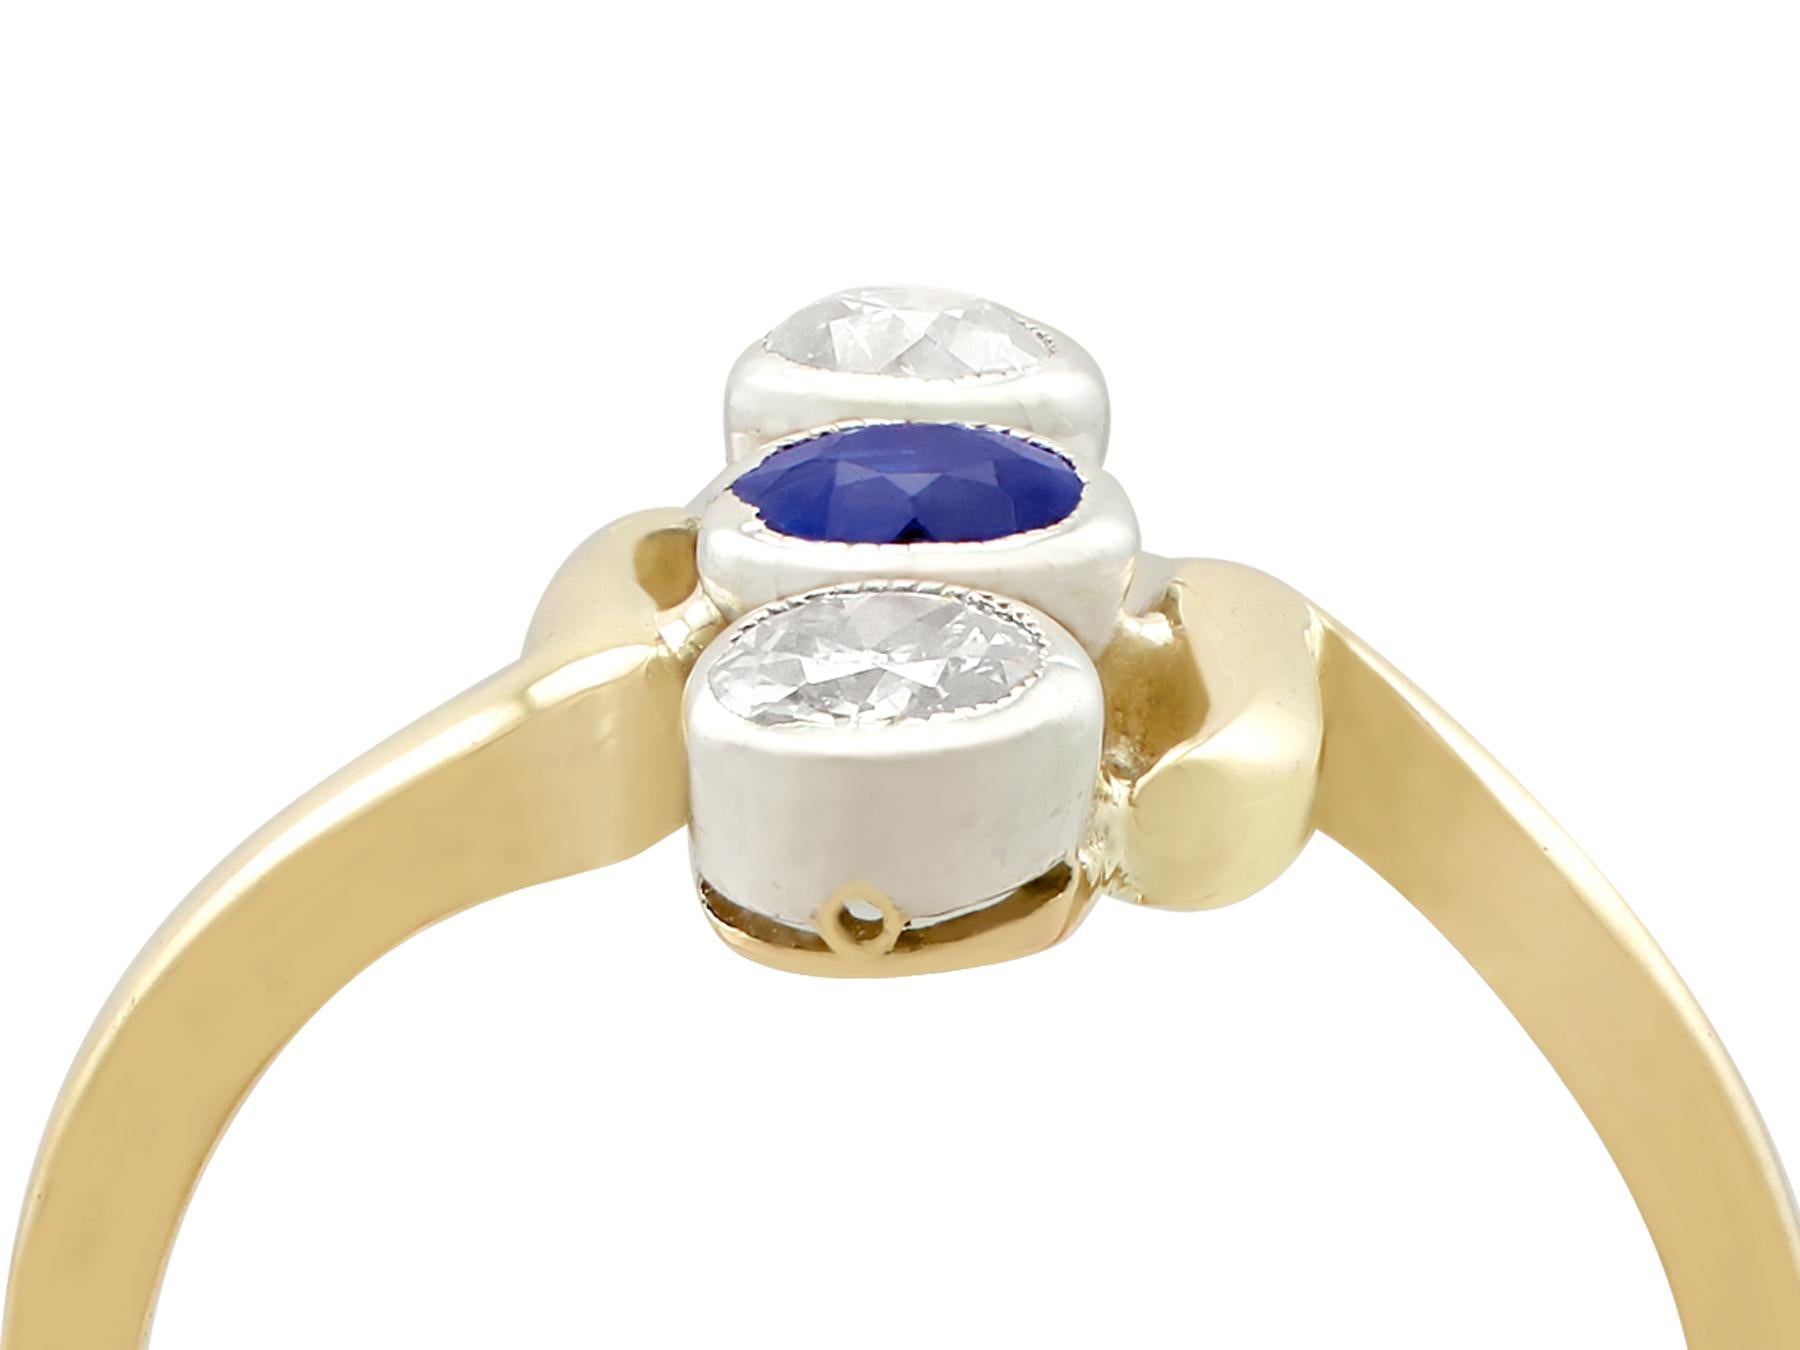 An impressive antique 1930s 0.25 carat sapphire and 0.40 carat diamond, 14 karat yellow gold and silver set twist ring; part of our diverse antique jewelry and estate jewelry collections.

This fine and impressive 1930s sapphire and diamond dress